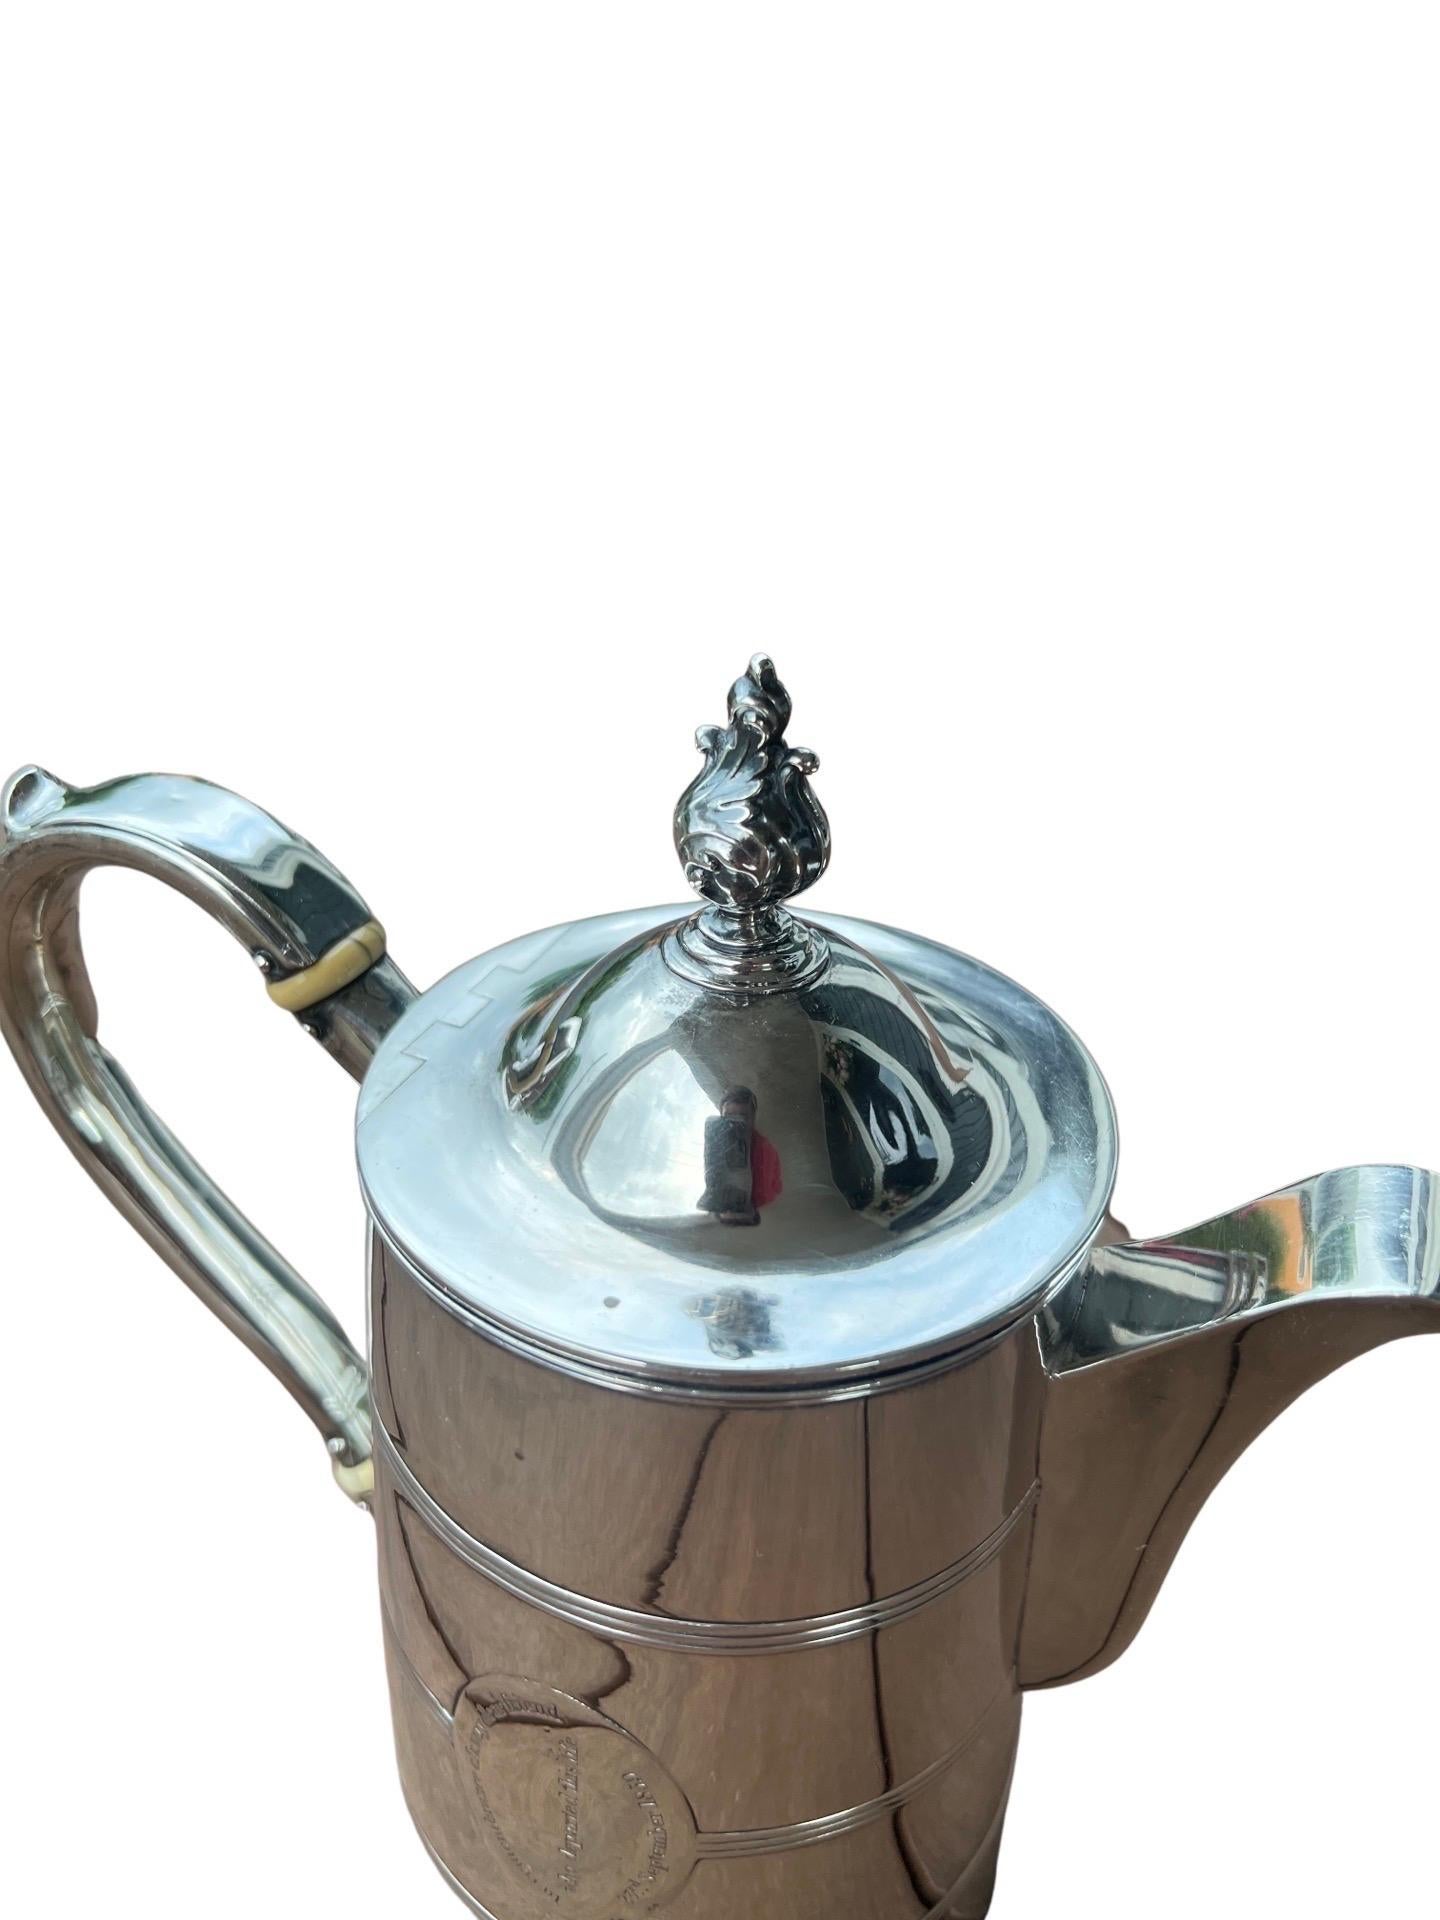 Henry Chawner Antique George III Sterling Silver Teapot Circa 1794 In Good Condition For Sale In Atlanta, GA